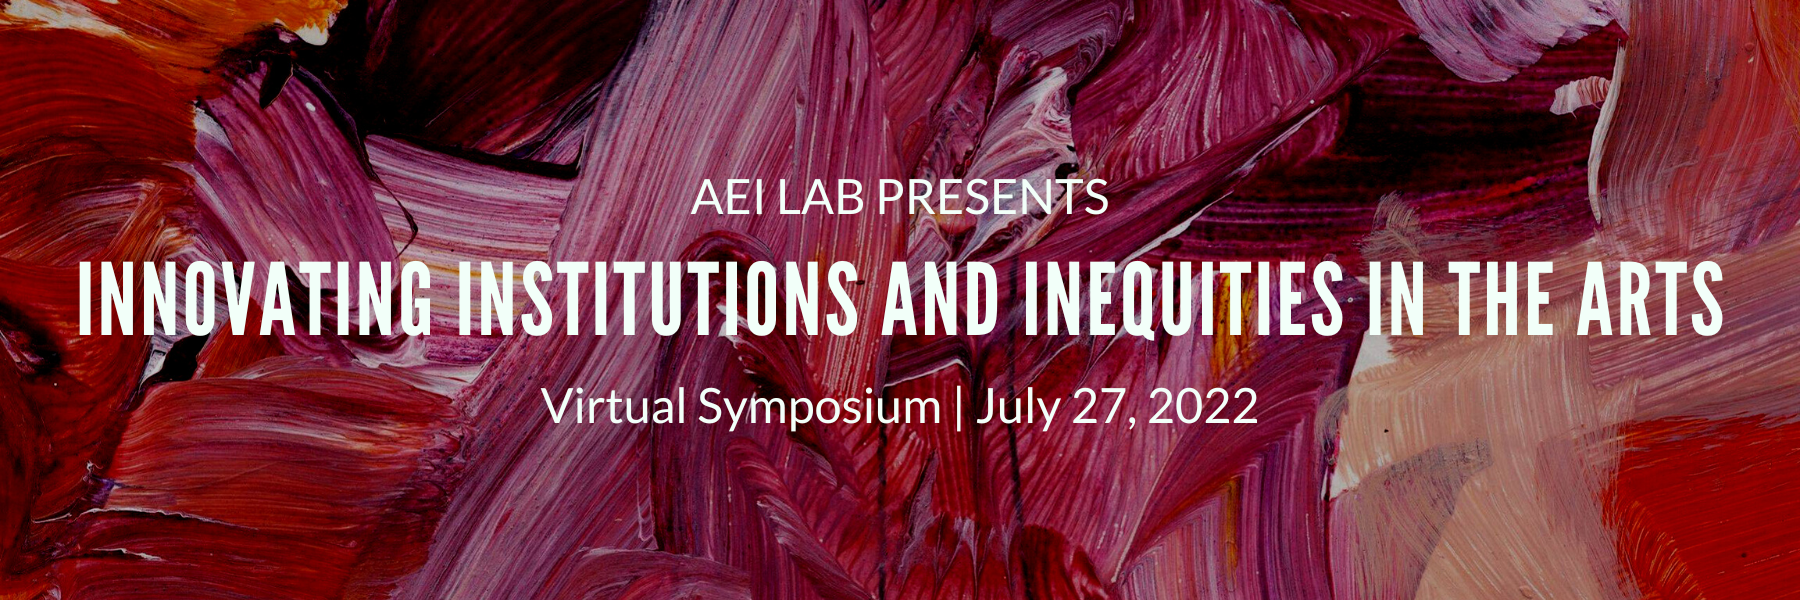 AEI Lab Symposium - Innovating Institutions and Inequities in the Arts - July 27, 2022